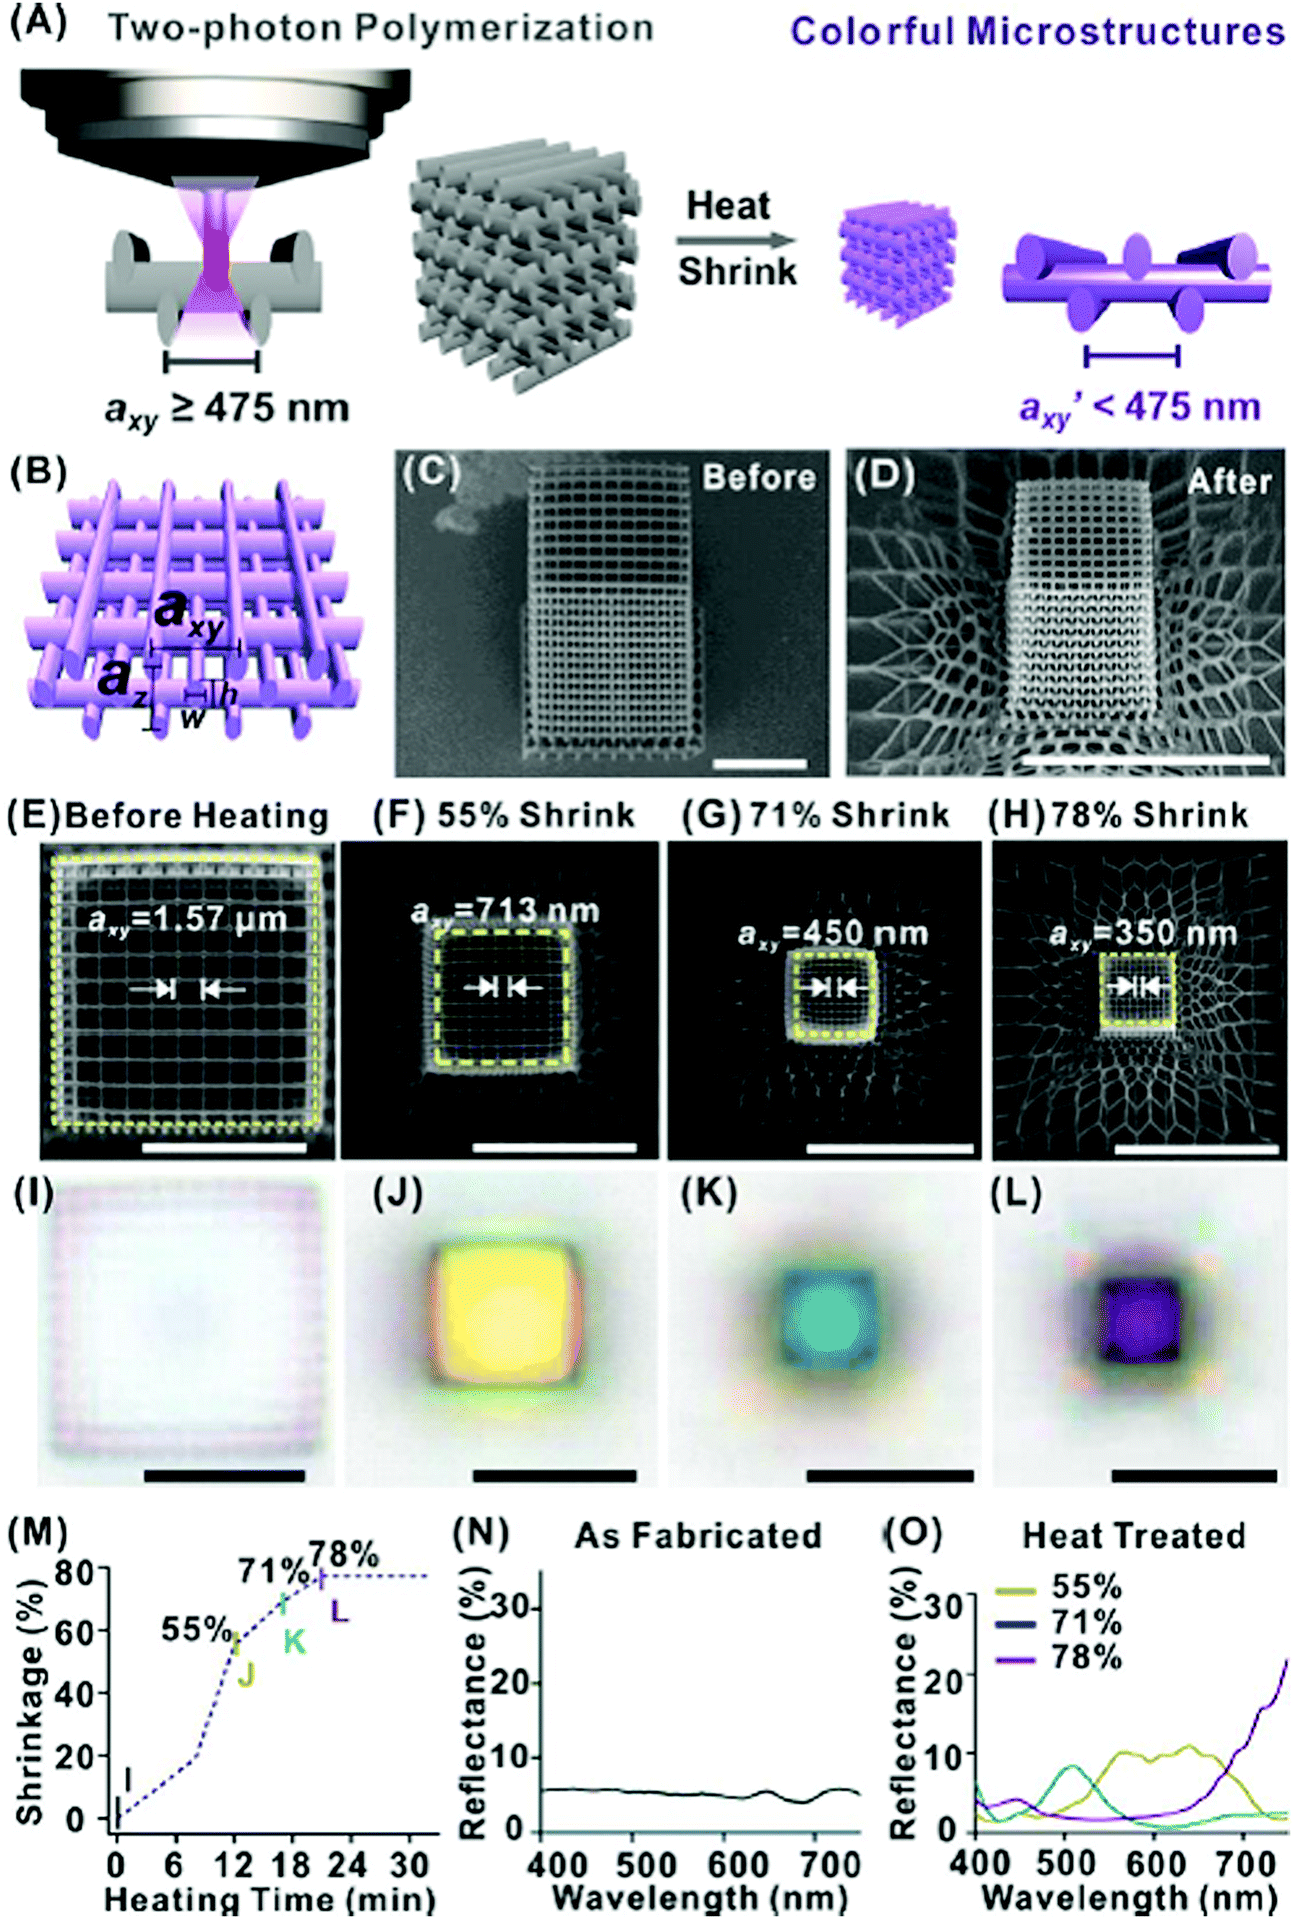 State Of Art Plasmonic Photonic Crystals Based On Self Assembled Nanostructures Journal Of Materials Chemistry C Rsc Publishing